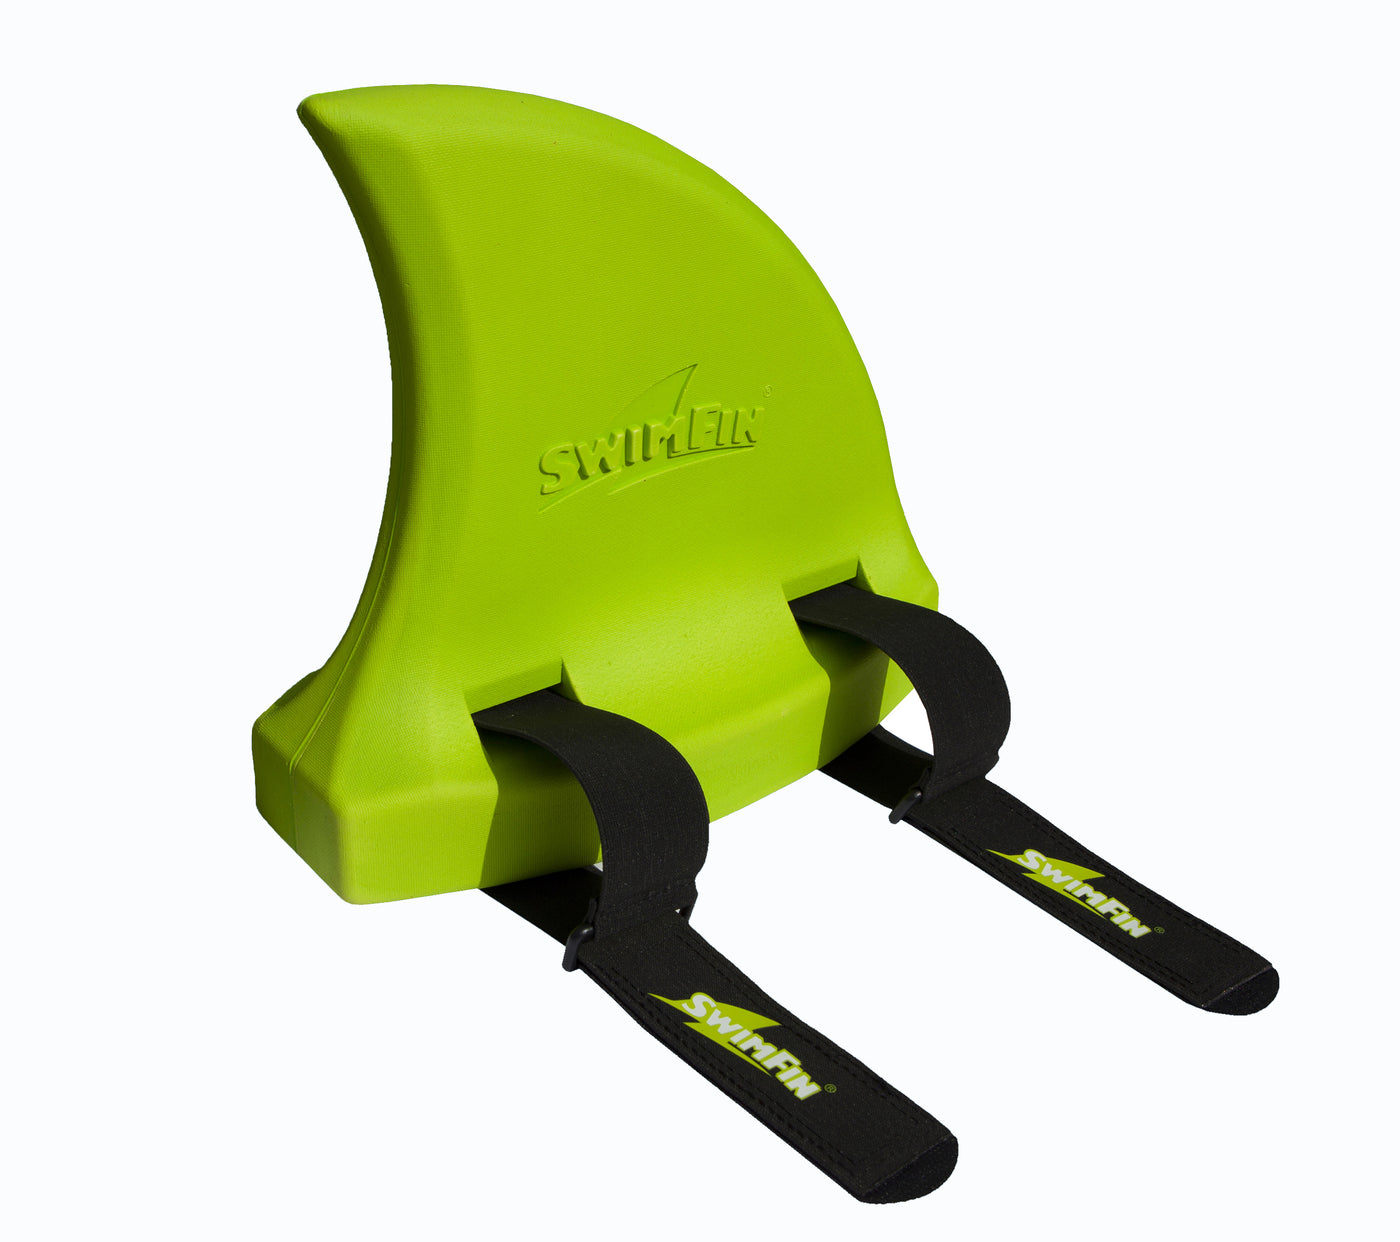 SwimFin in green, the Shark Fin for Children learning to swim, a safety swimming aid and flotation device.